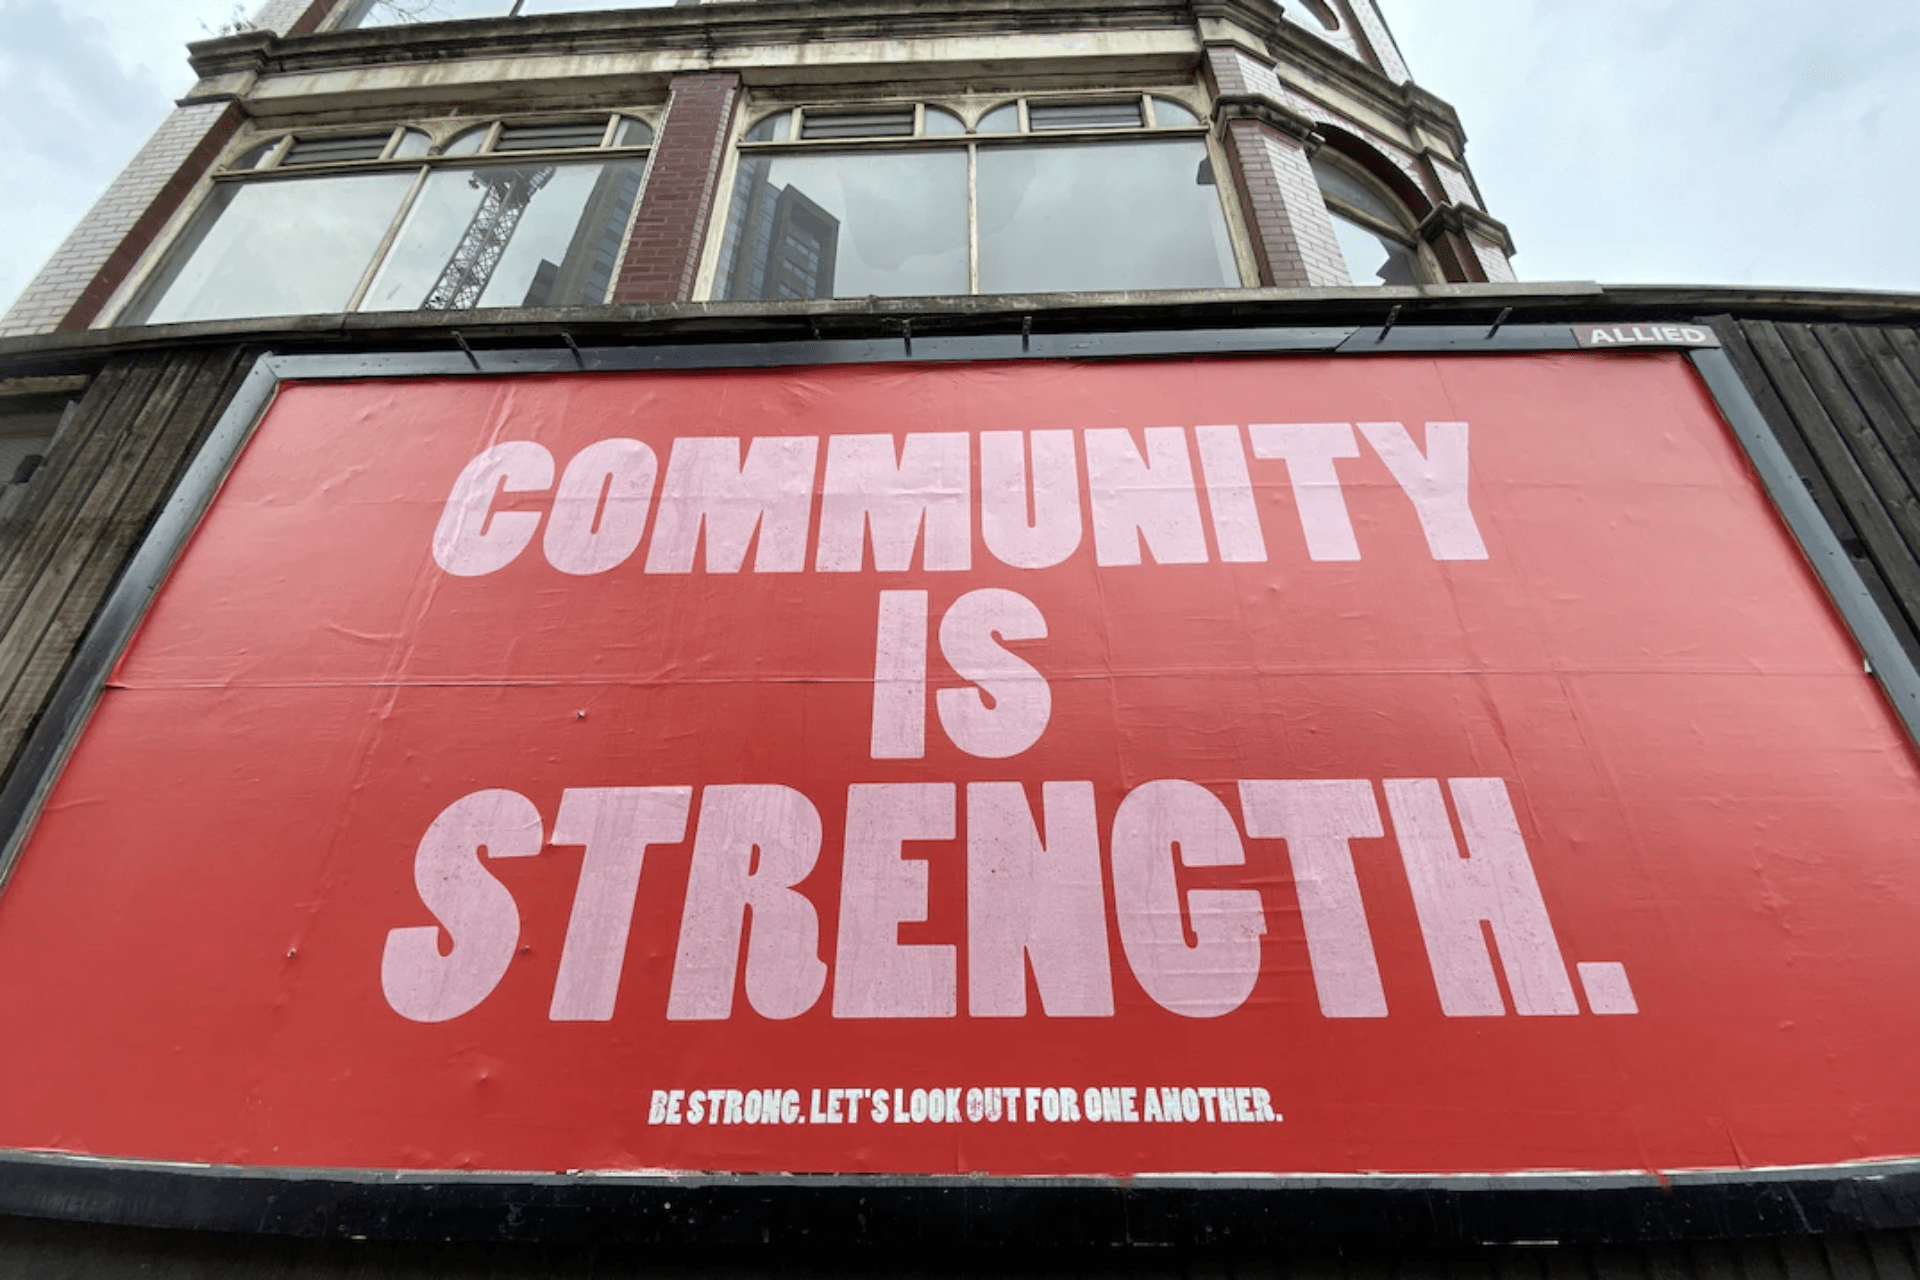 A billboard that says, “Community is strength” 